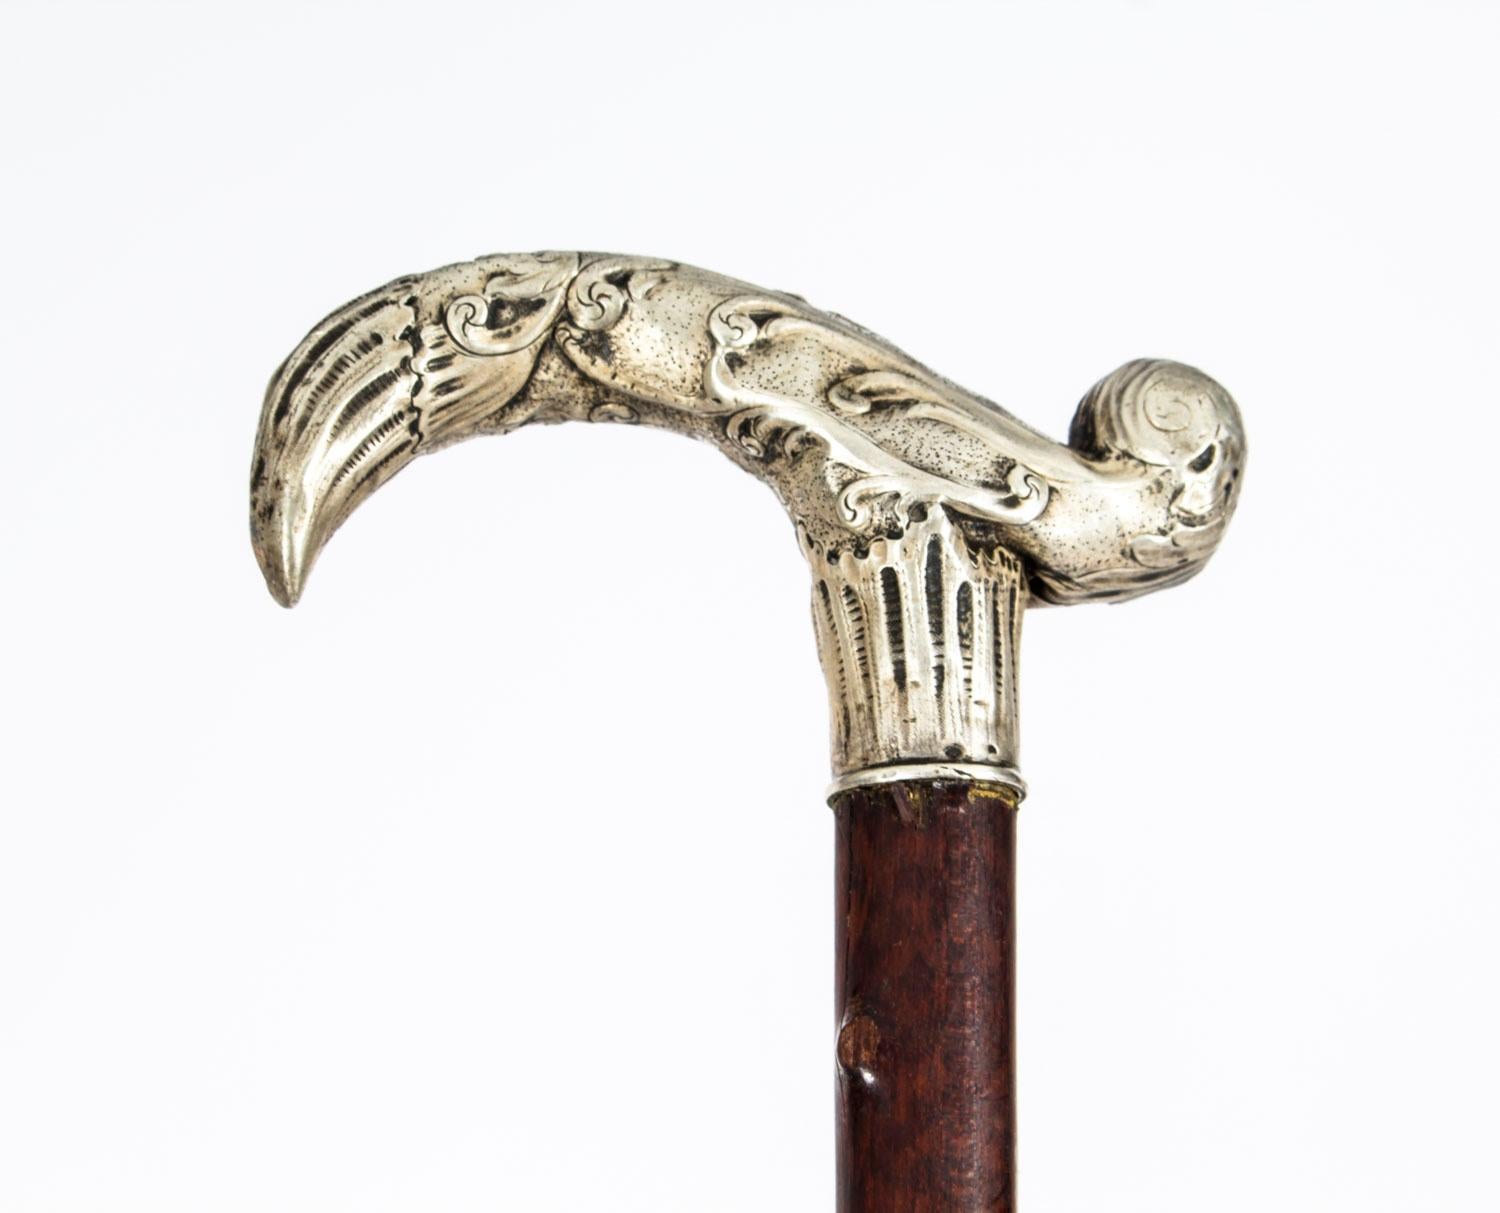 English Antique Silver Plated Walking Cane Stick, 19th Century